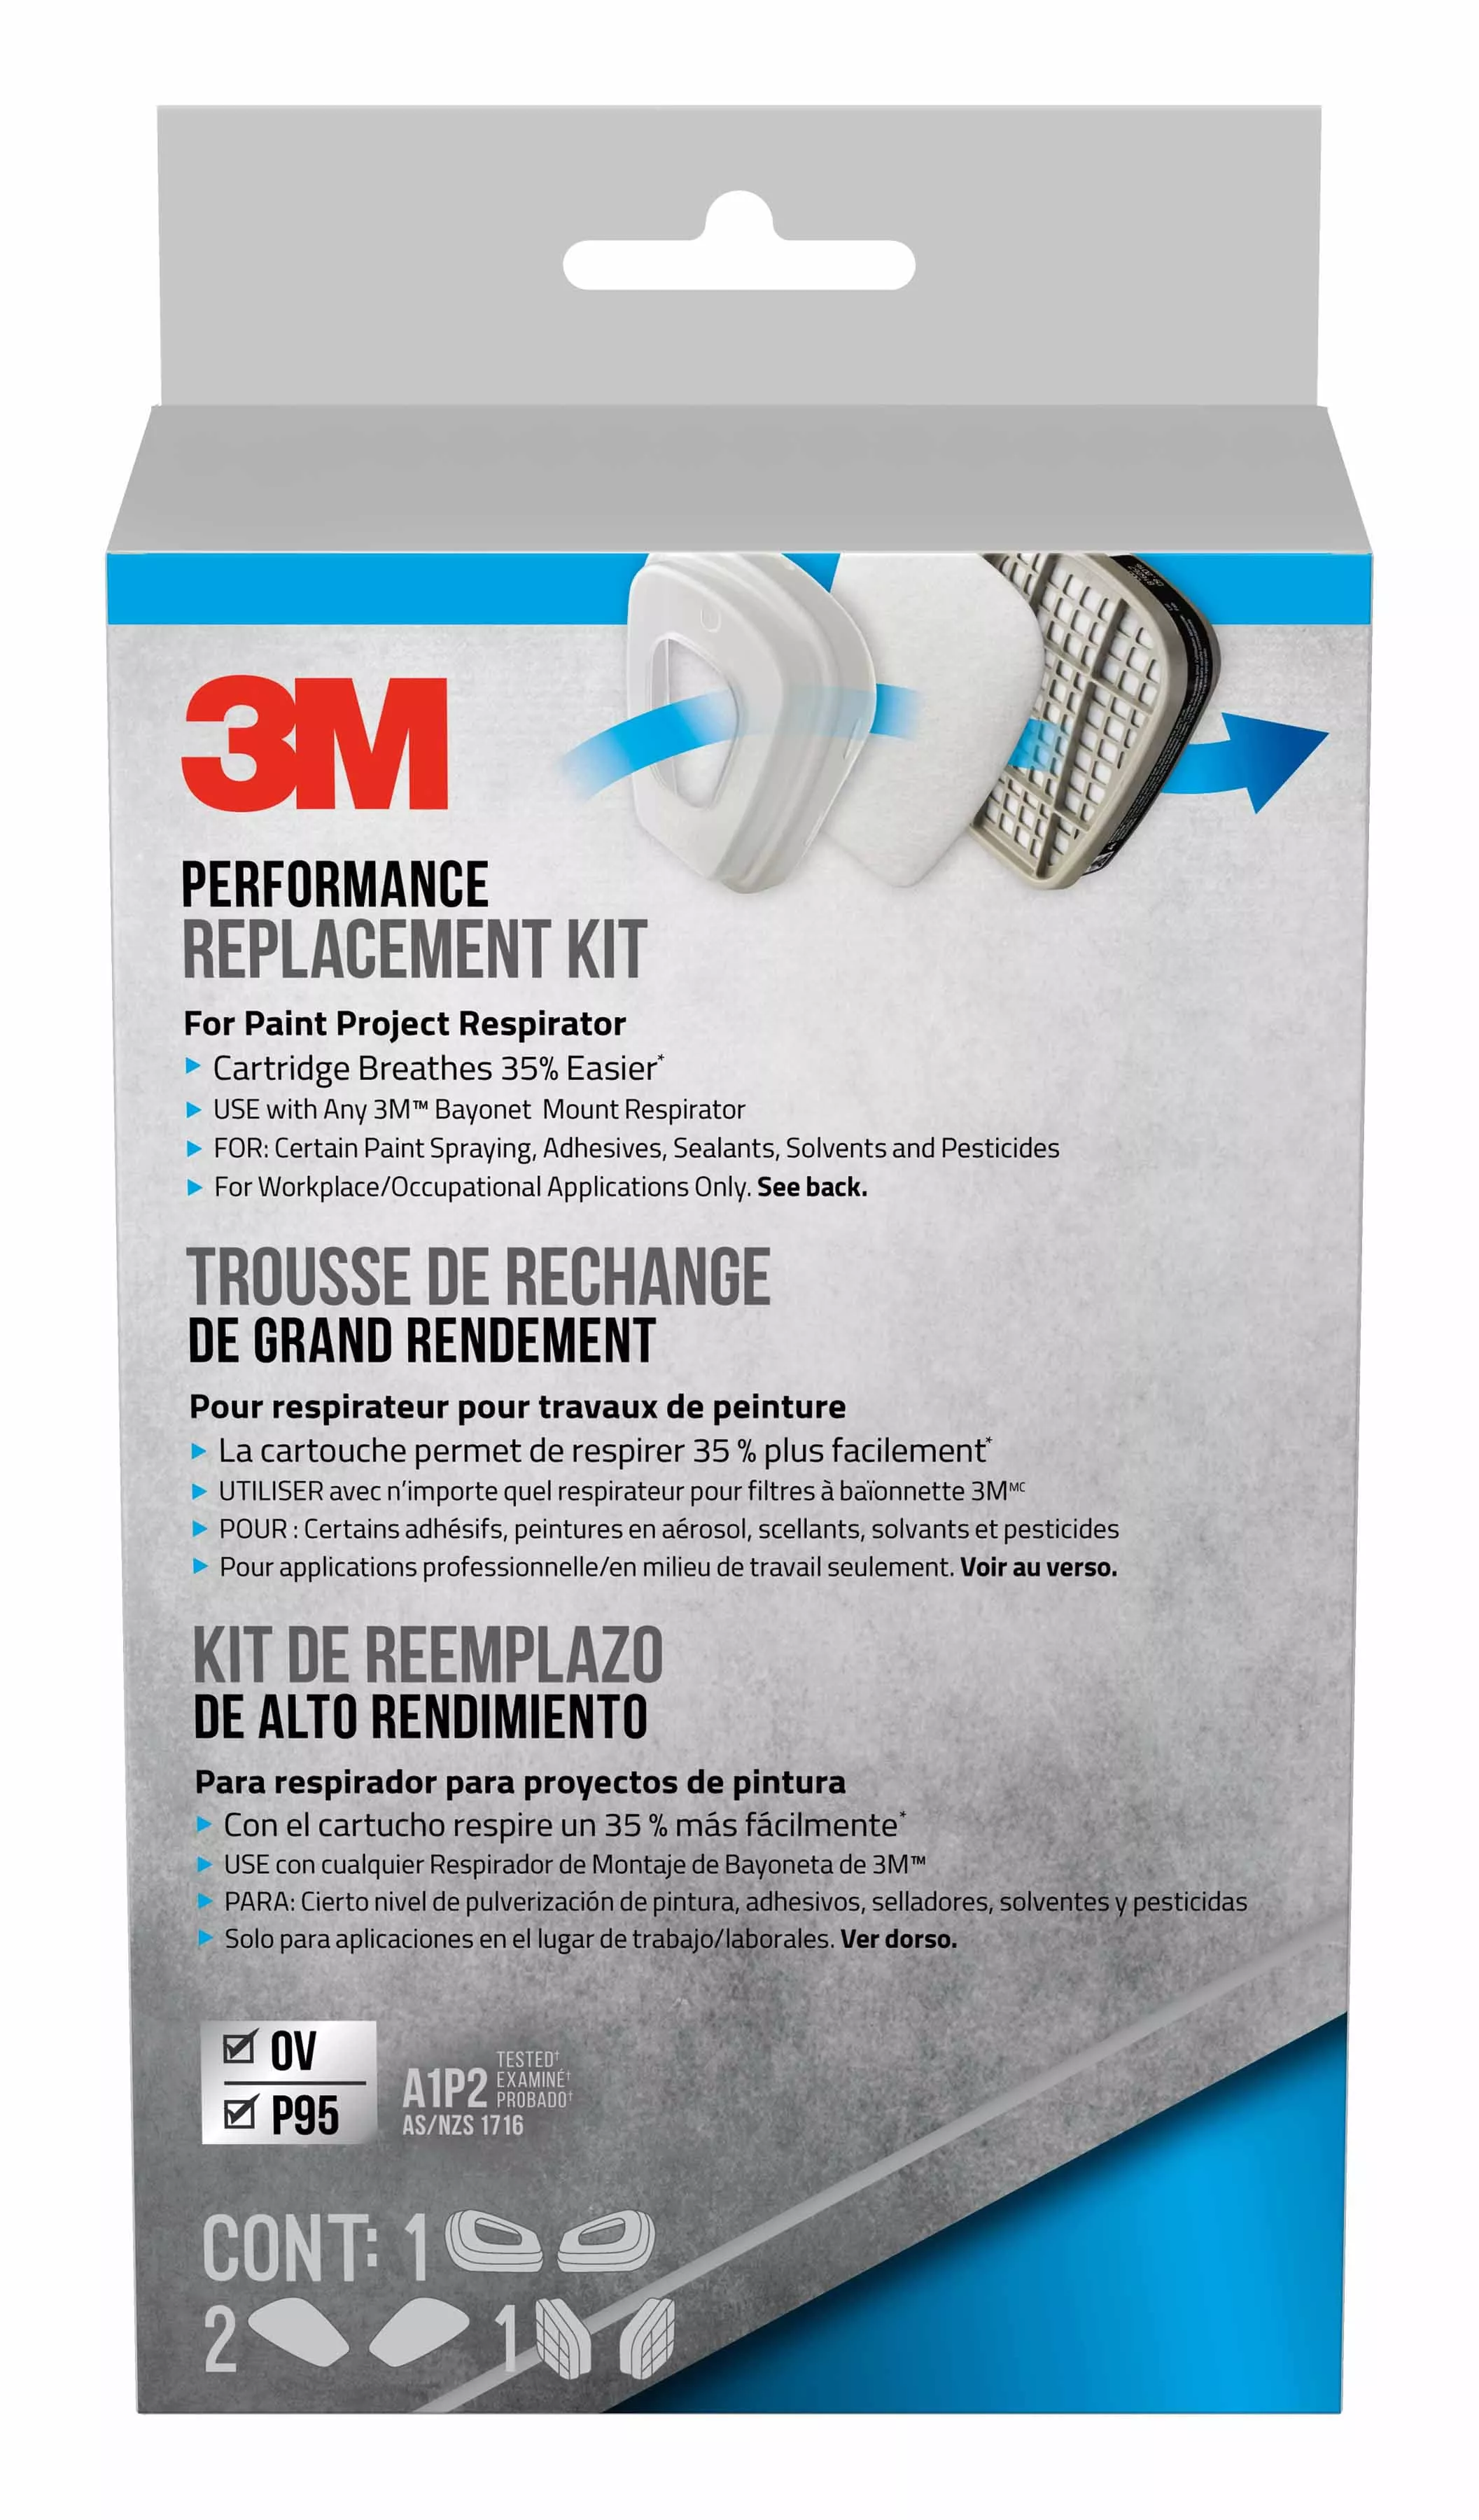 SKU 7100159397 | 3M™ Performance Replacement Kit for the Paint Project Respirator OV/P95